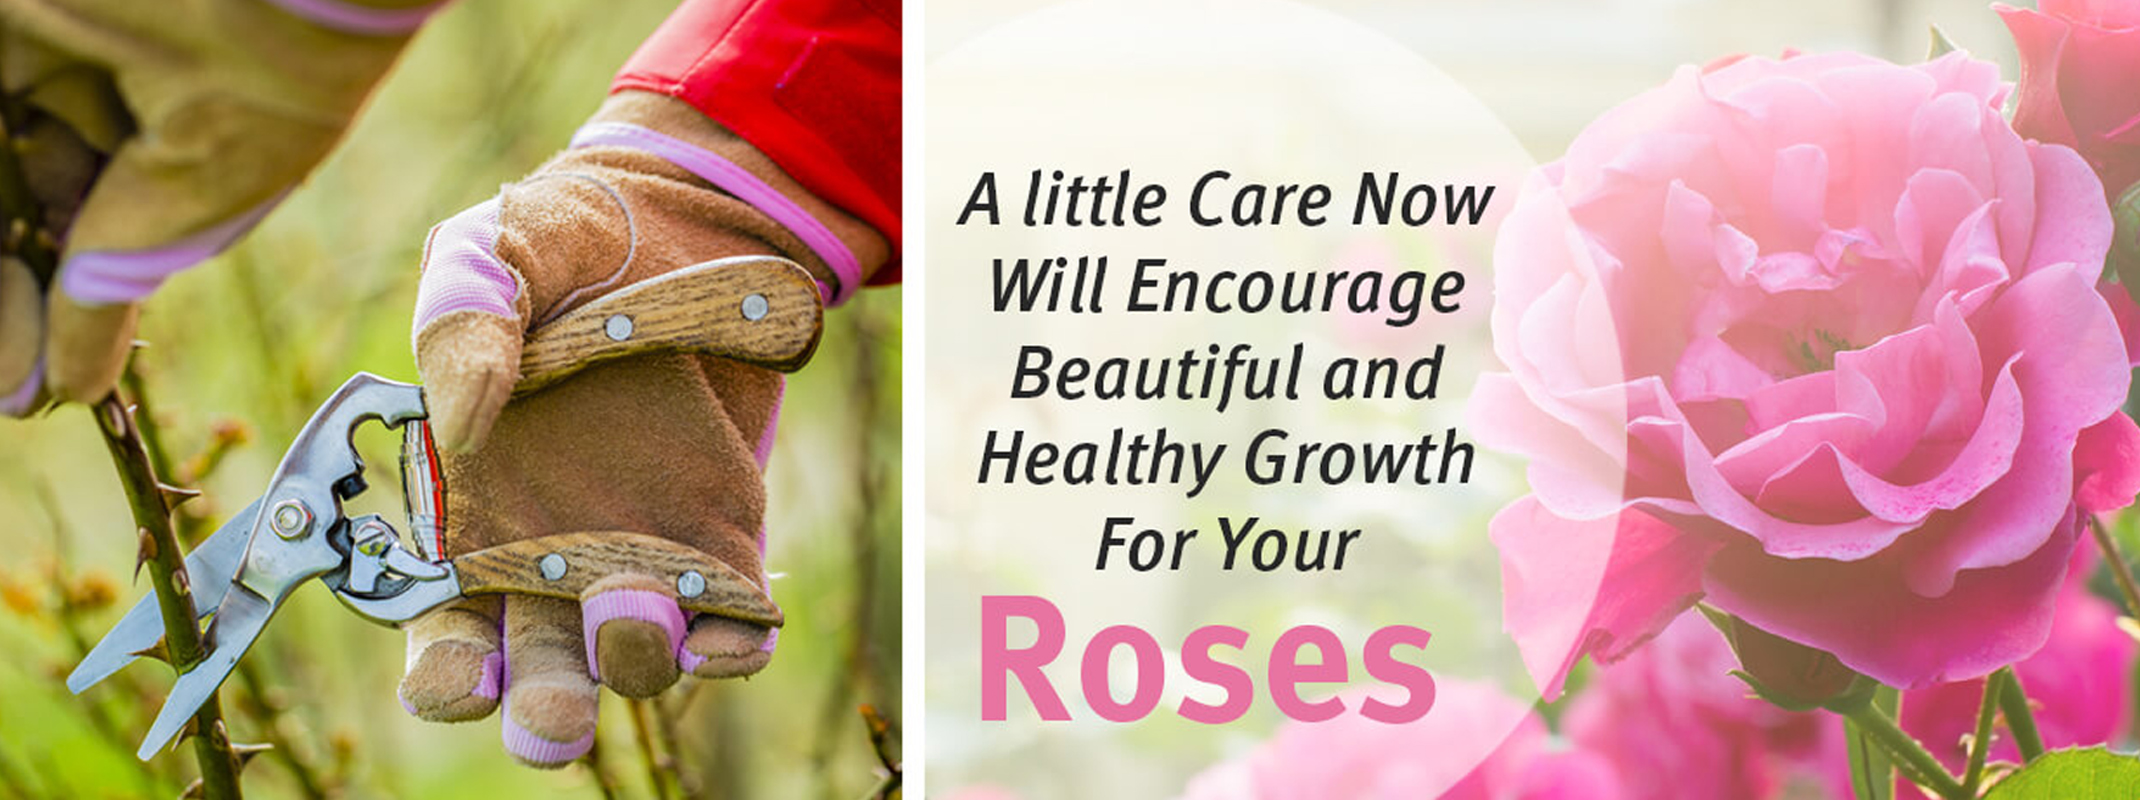 2 images the first pruning a rose and the second a deep pink rose with the words a little care now will encourage beautiful and healthy growth for your roses on the image